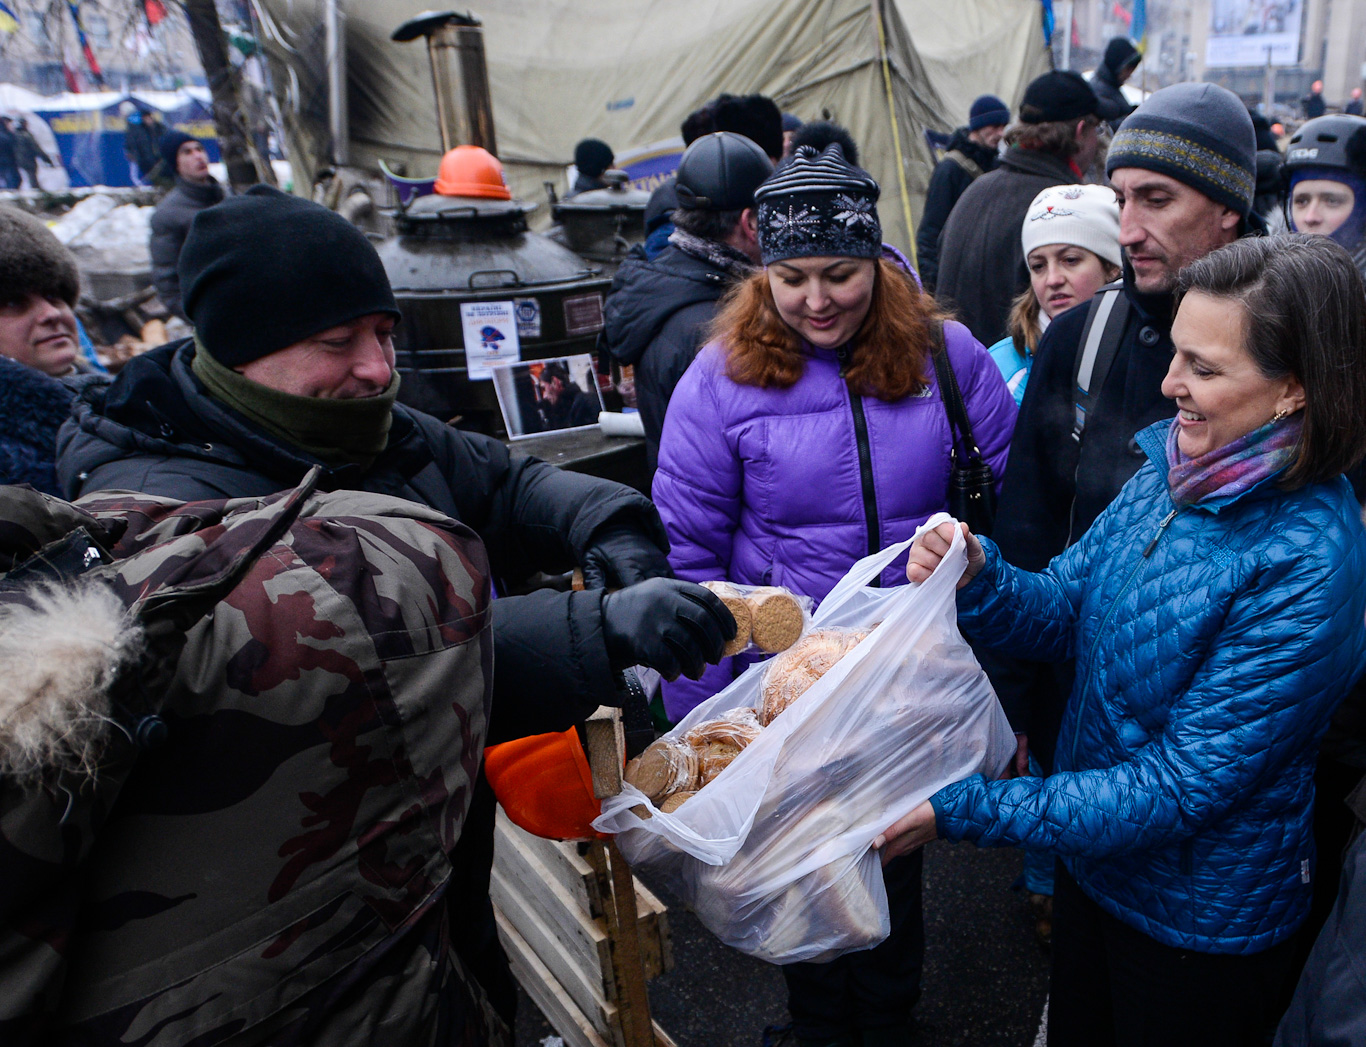 Victoria Nuland smiles as she holds an open bag of snacks for protestors. One person is taking a snack from the bag.